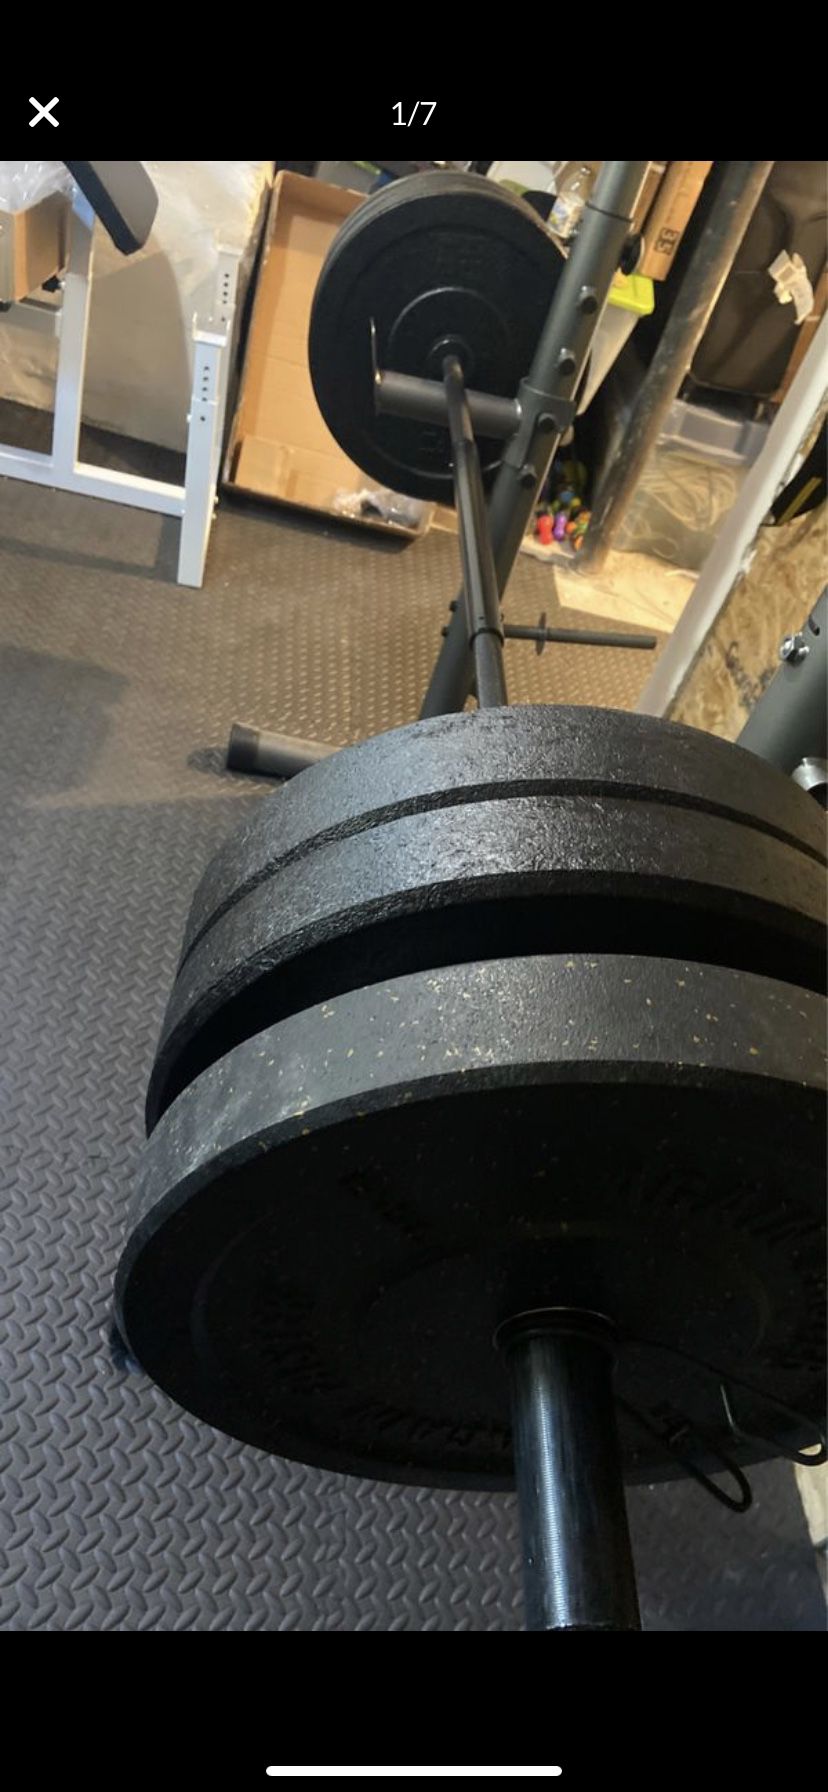 Olympic 7 foot barbell supports 400 pounds. Best Offer